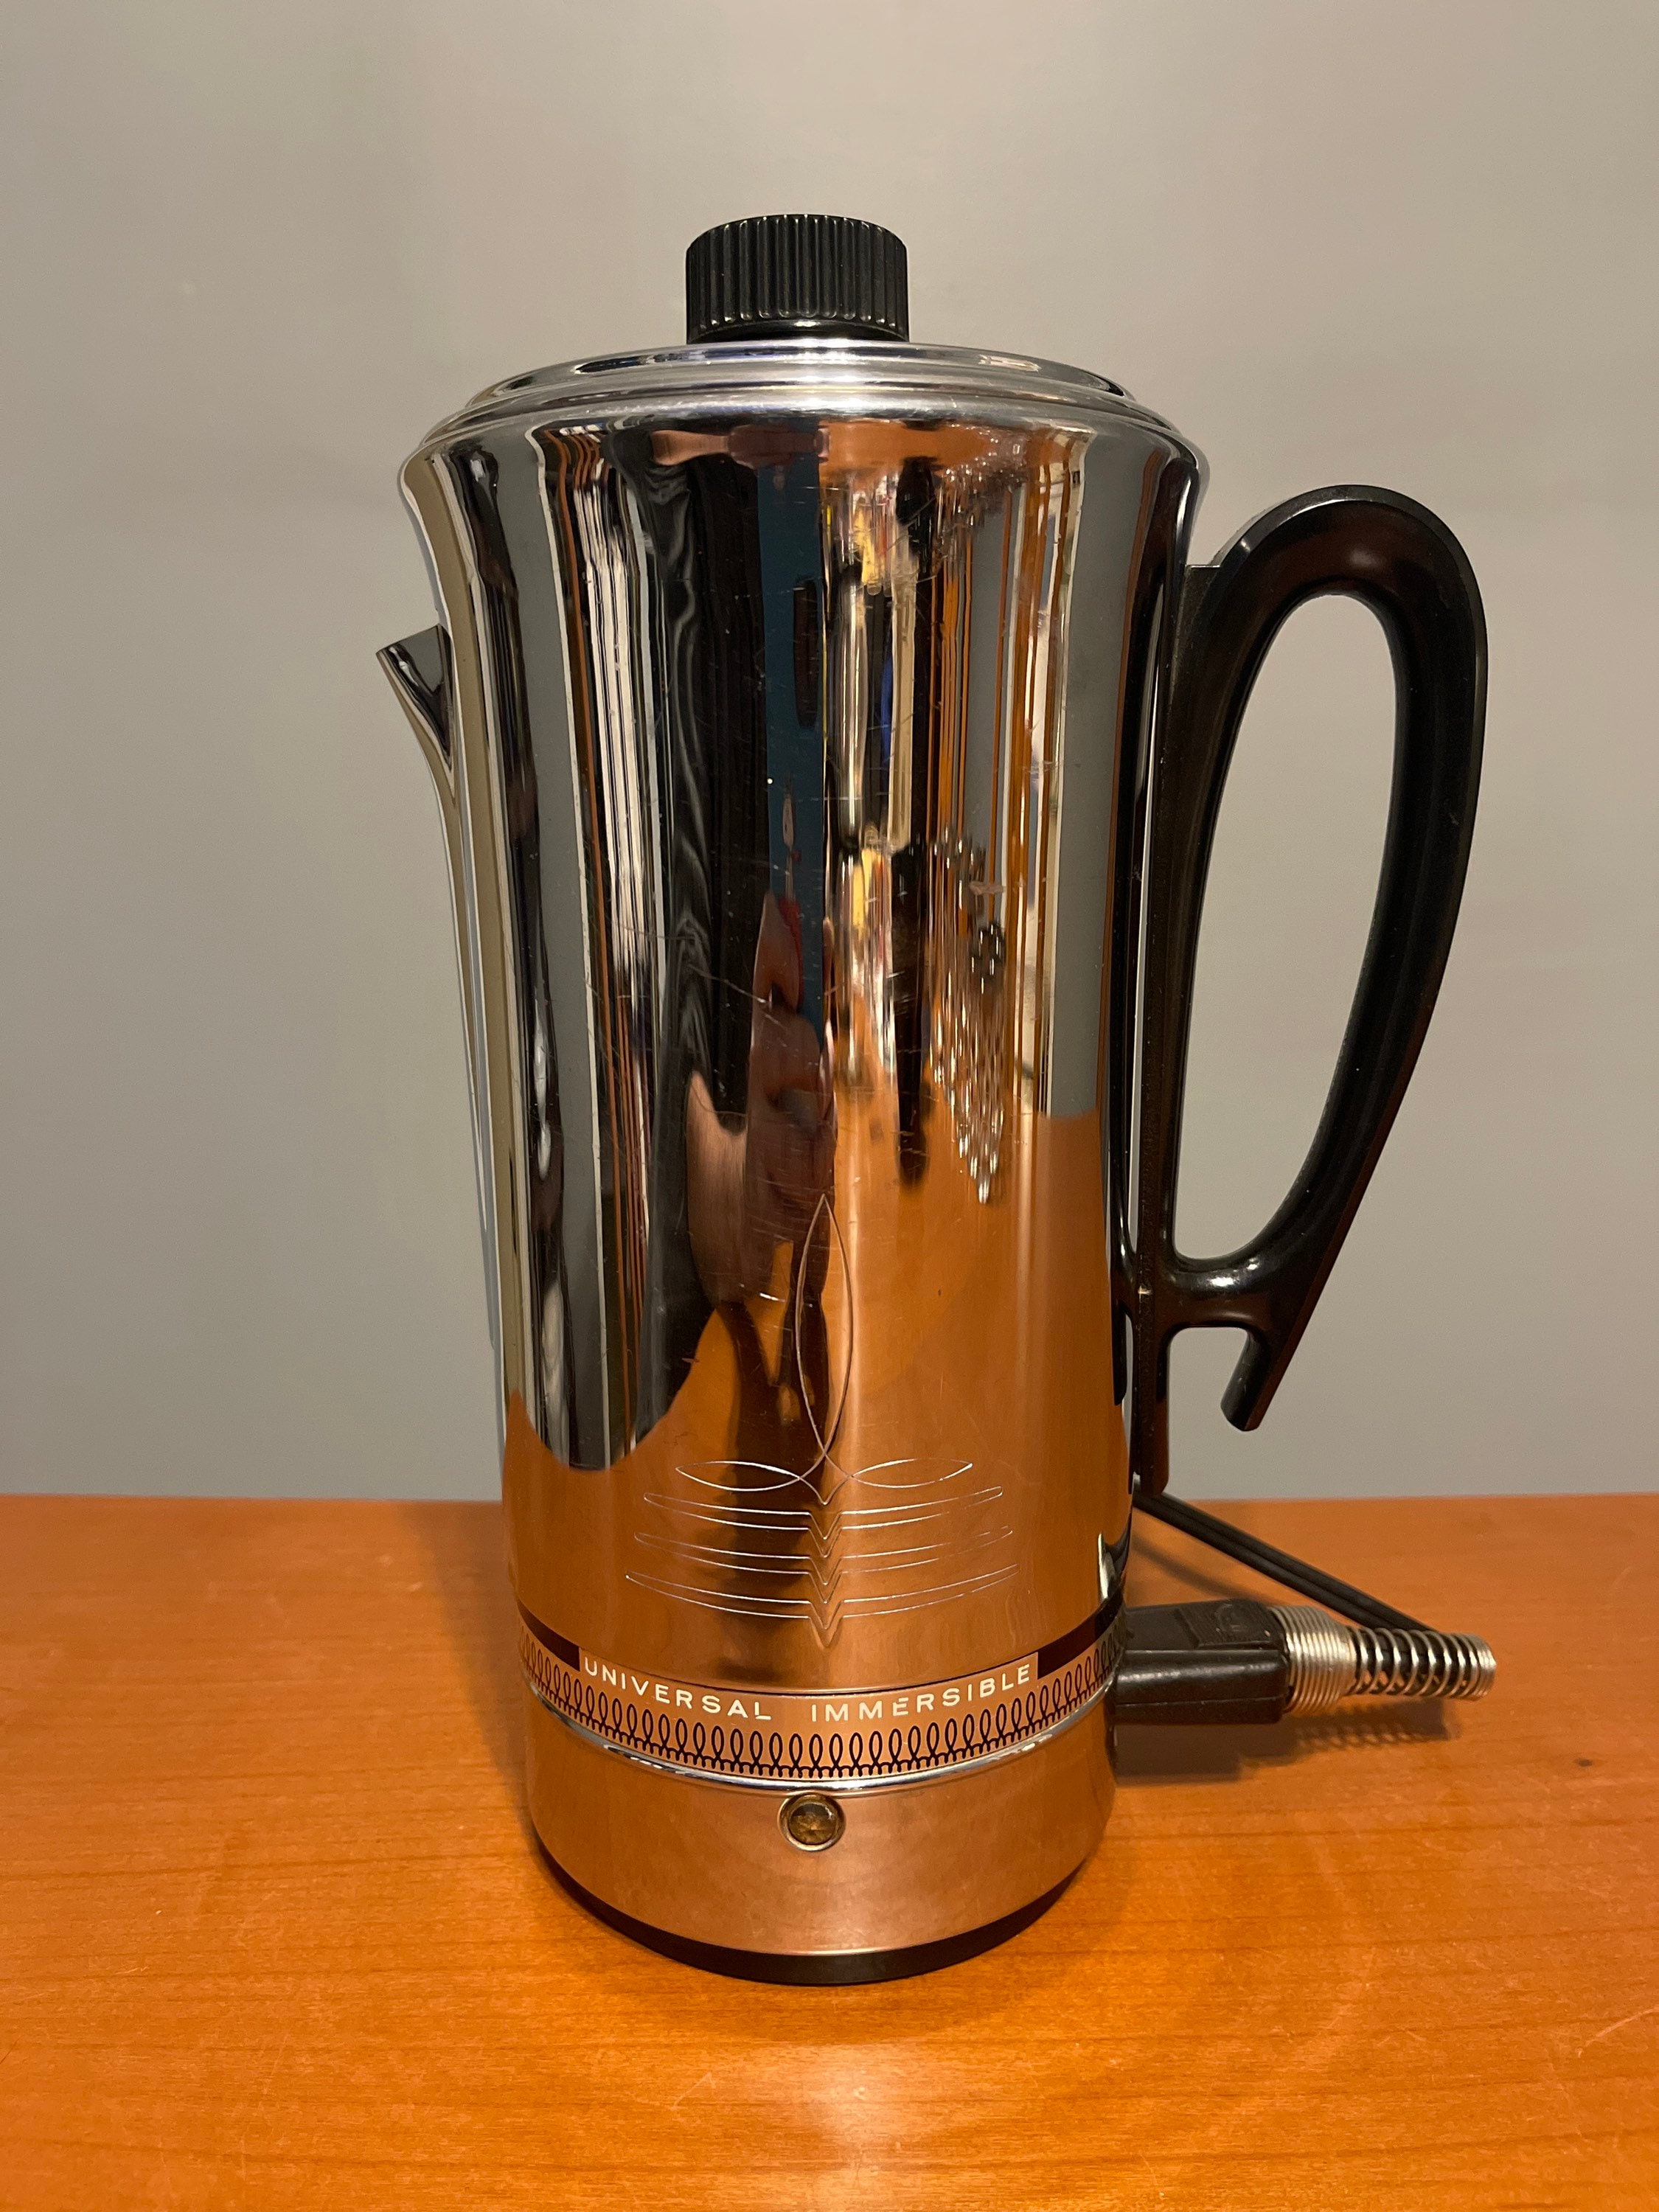 1950s General Electric Pot Belly Coffee Percolator Black Bakelite Handle  and Feet Chrome and Stainless Model P410B 